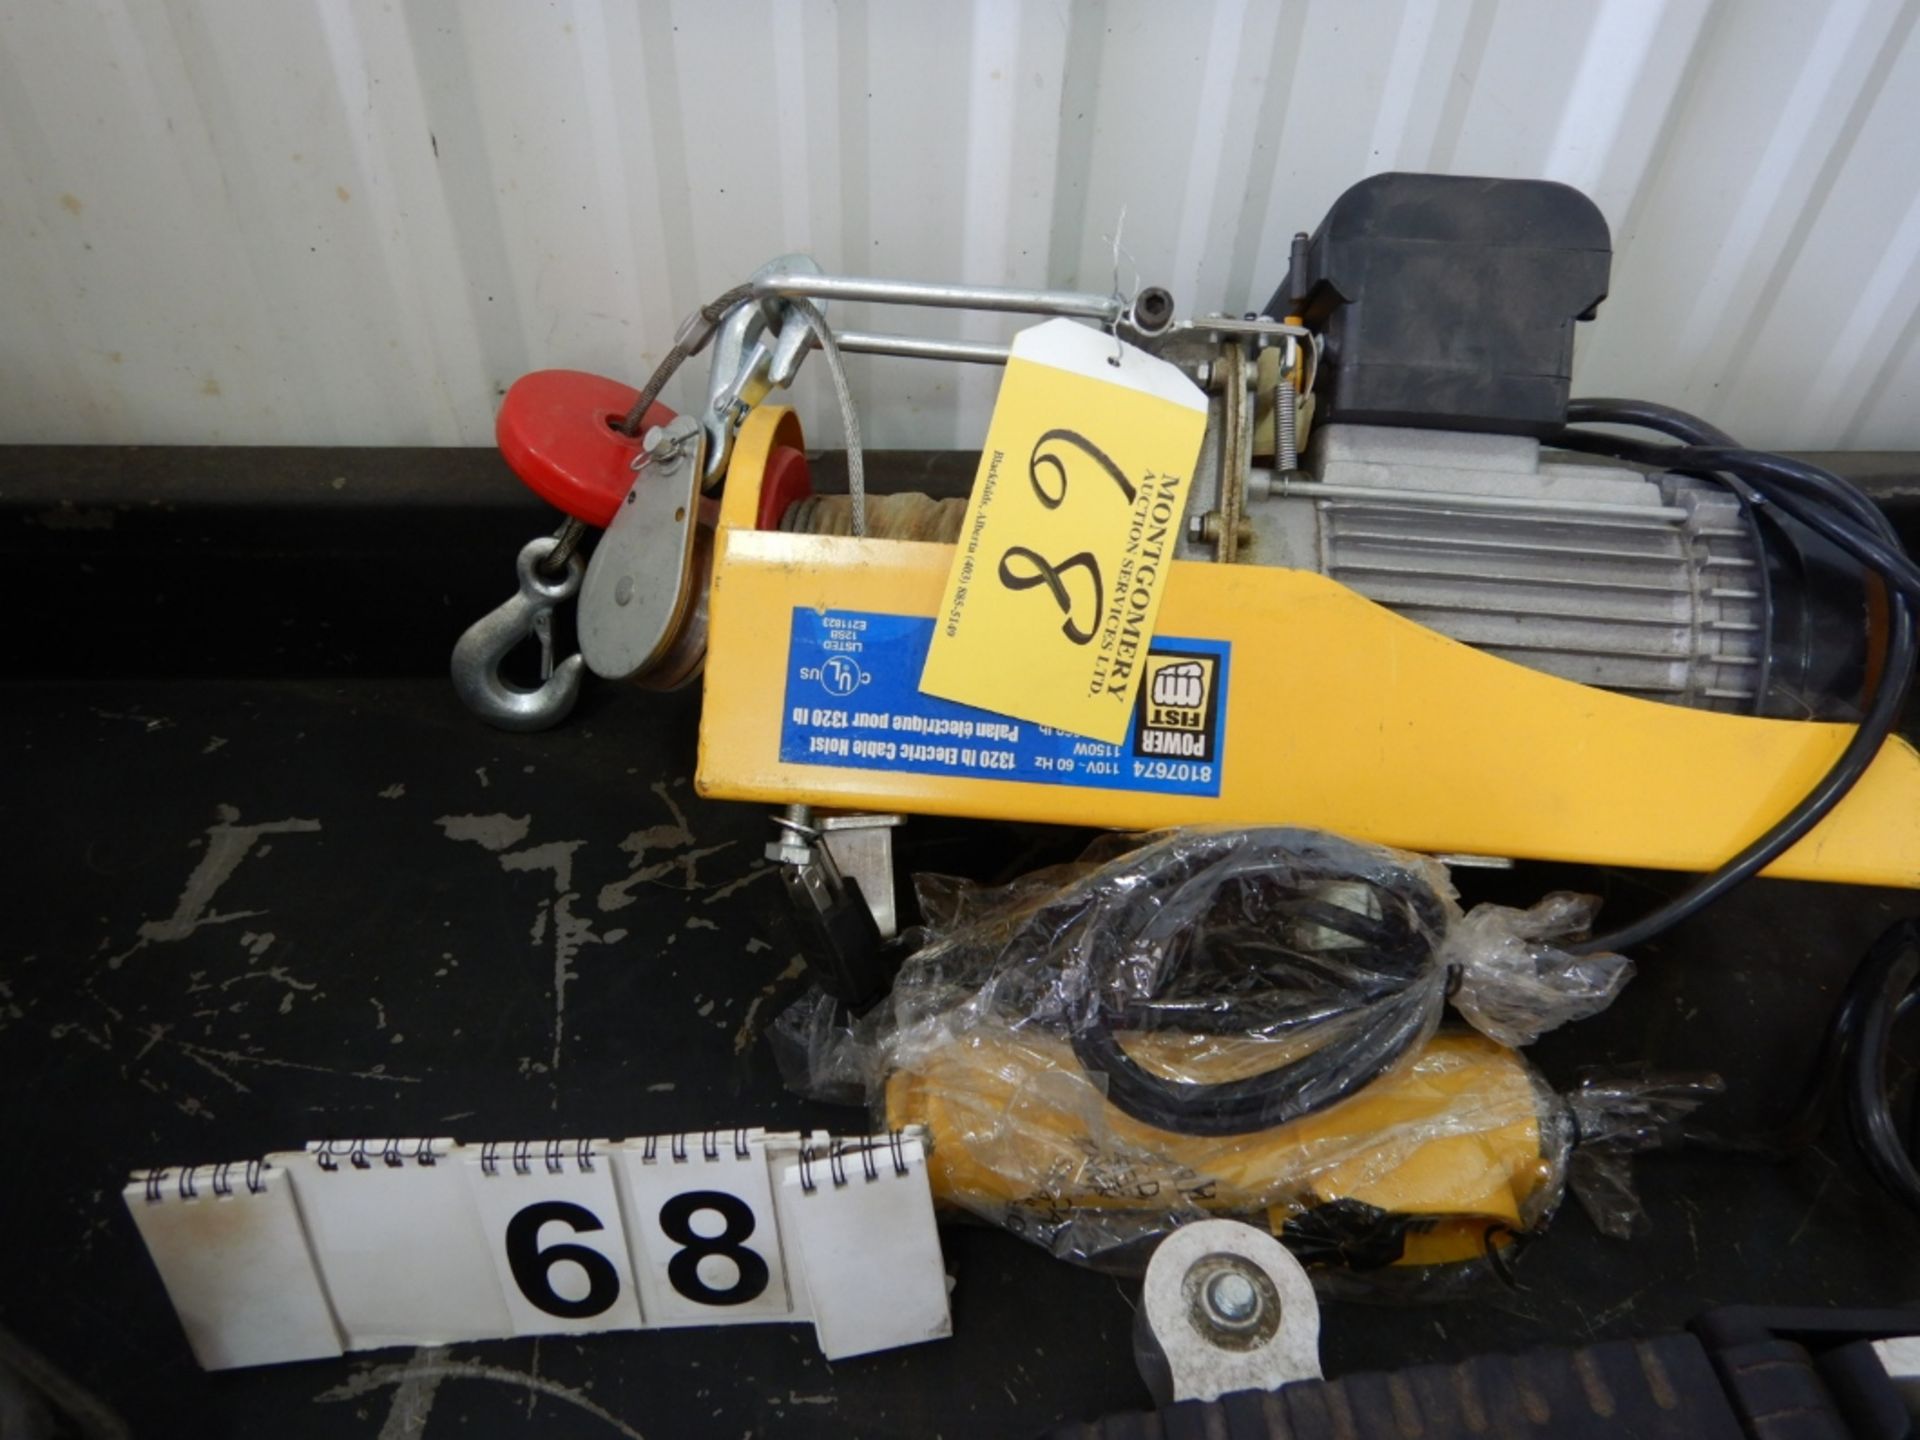 1320 LB ELECTRIC CABLE HOIST C/W HAND CONTROL, 660 LB CAPACITY, HEIGHT: 18/38 FT 110V